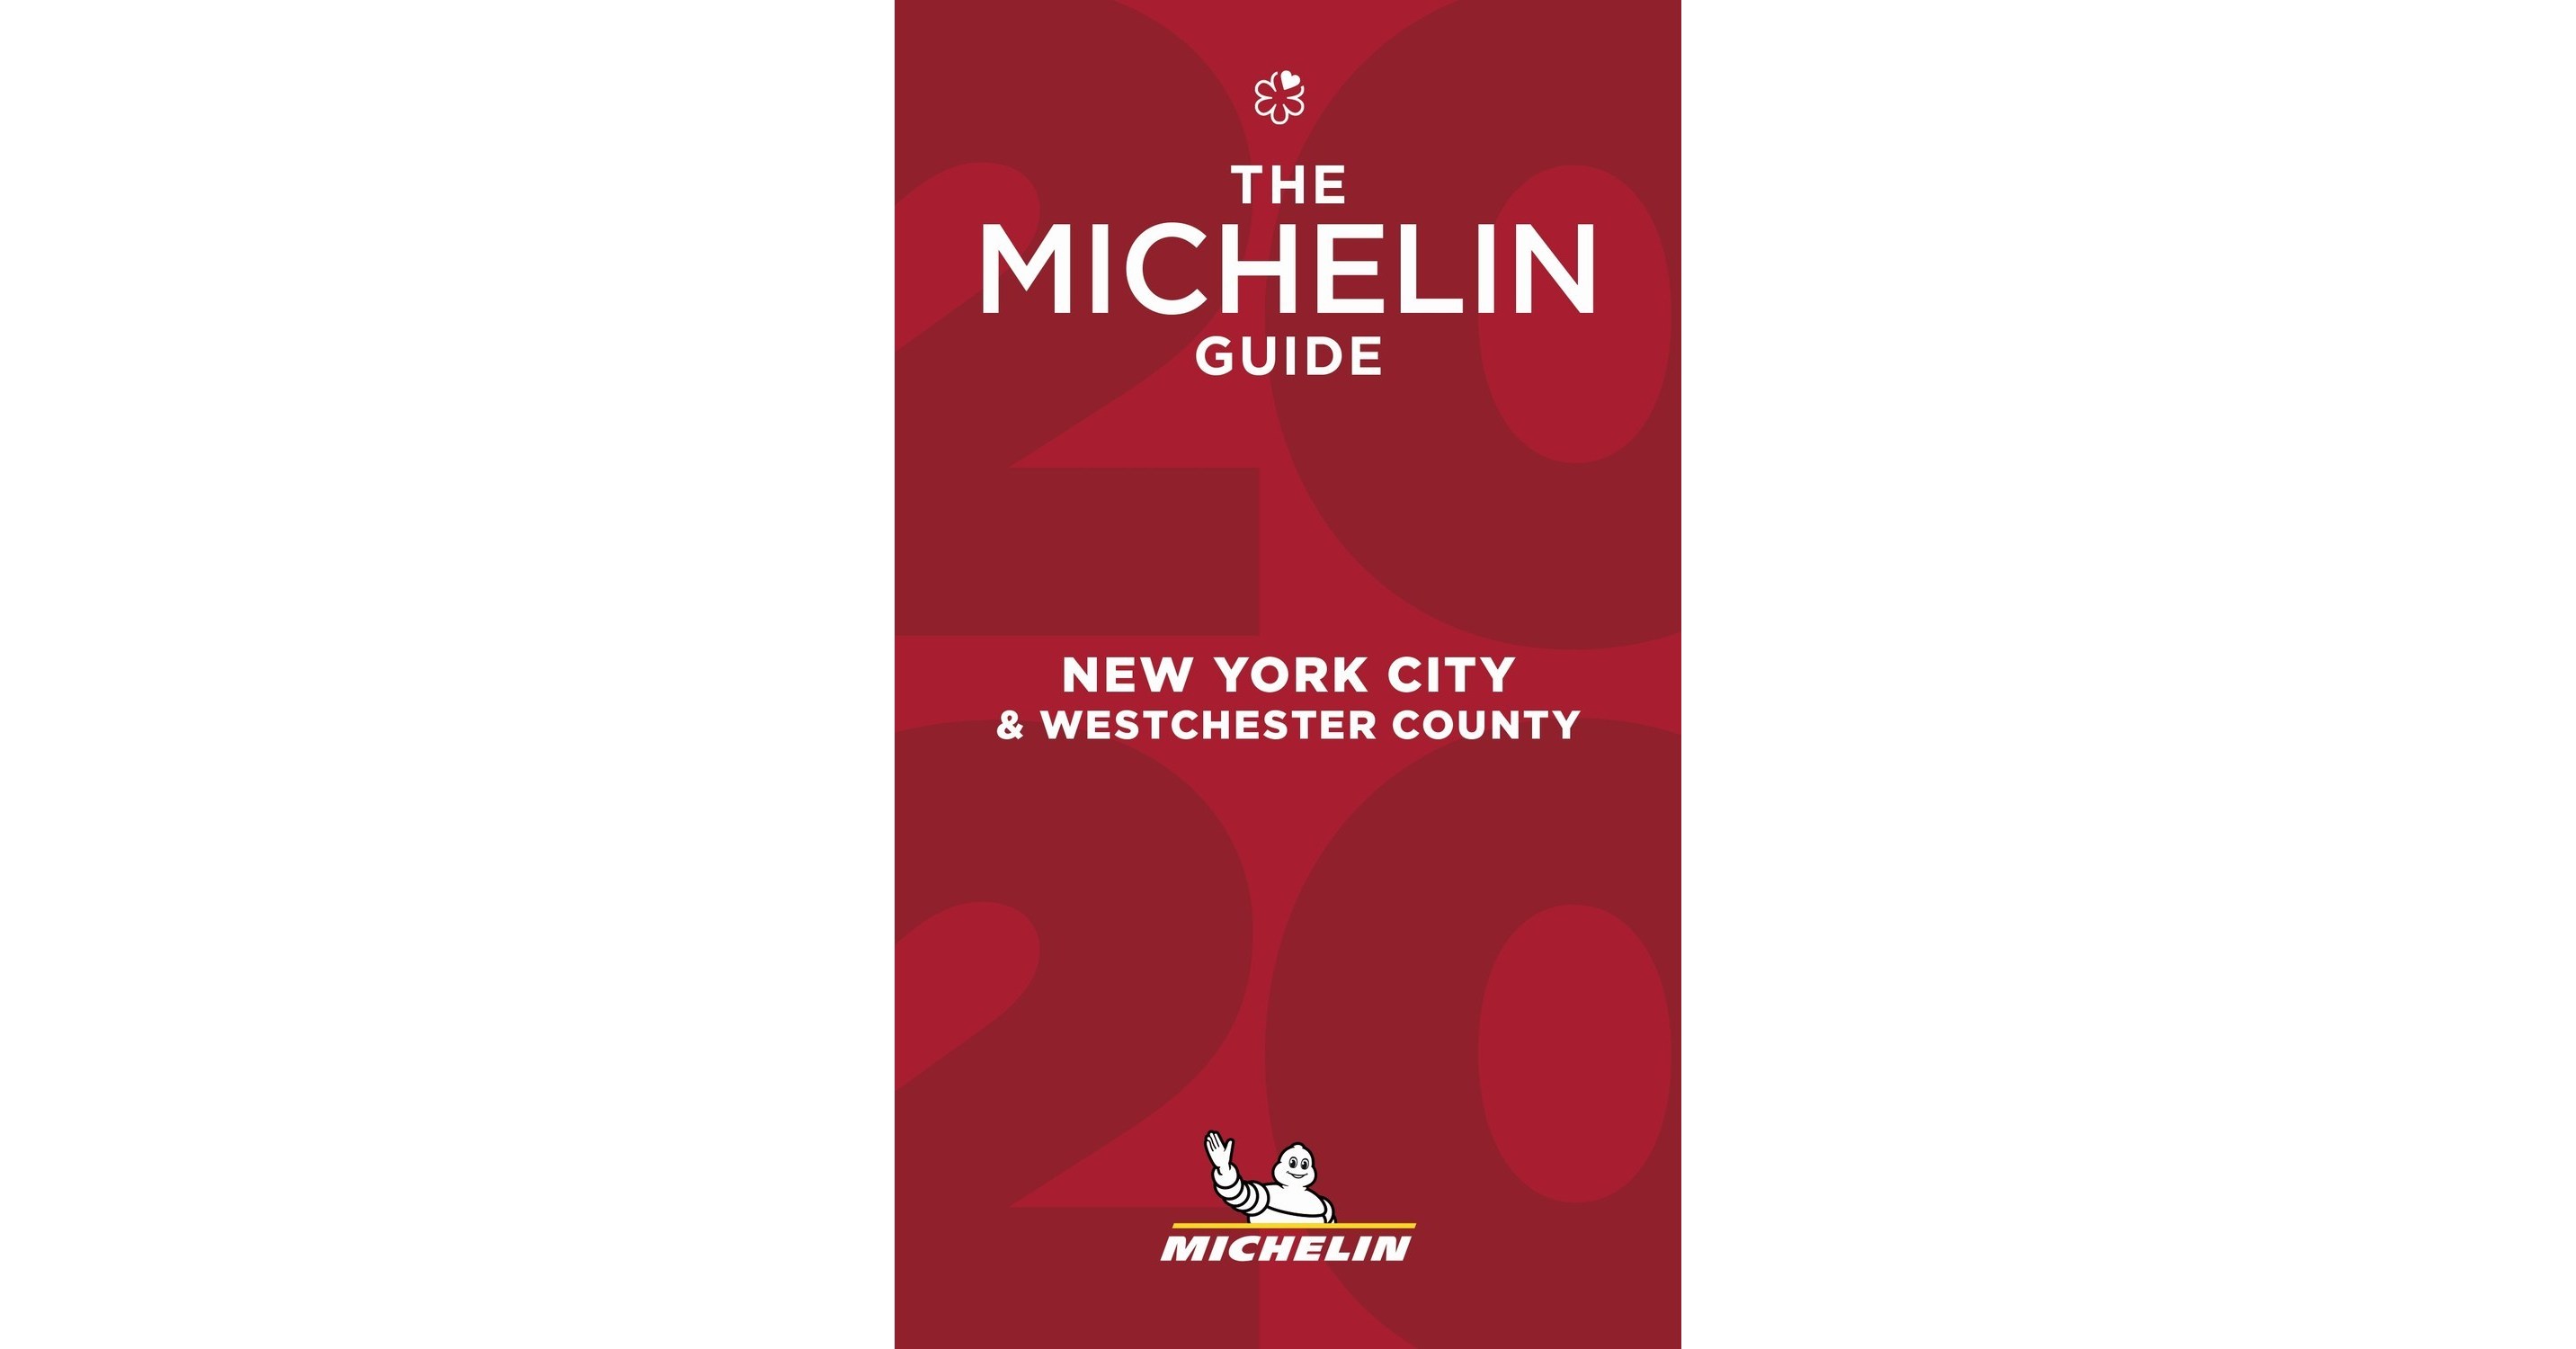 133 Bib Gourmands Featured In The 15th Edition Of The MICHELIN Guide